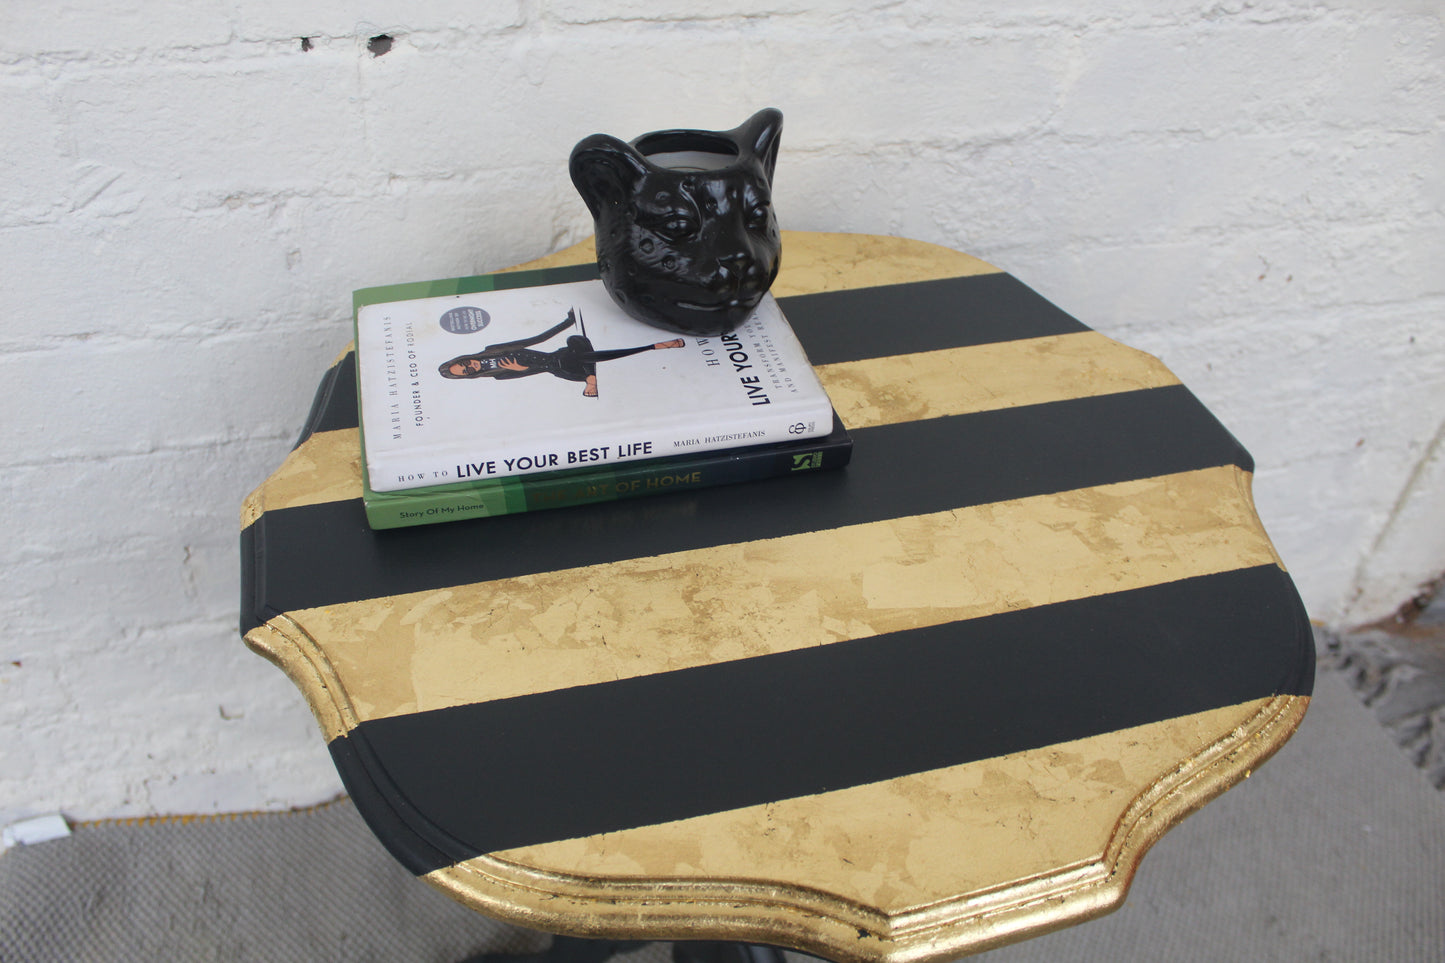 Eleanor Stripey Gold and Grey Side Table